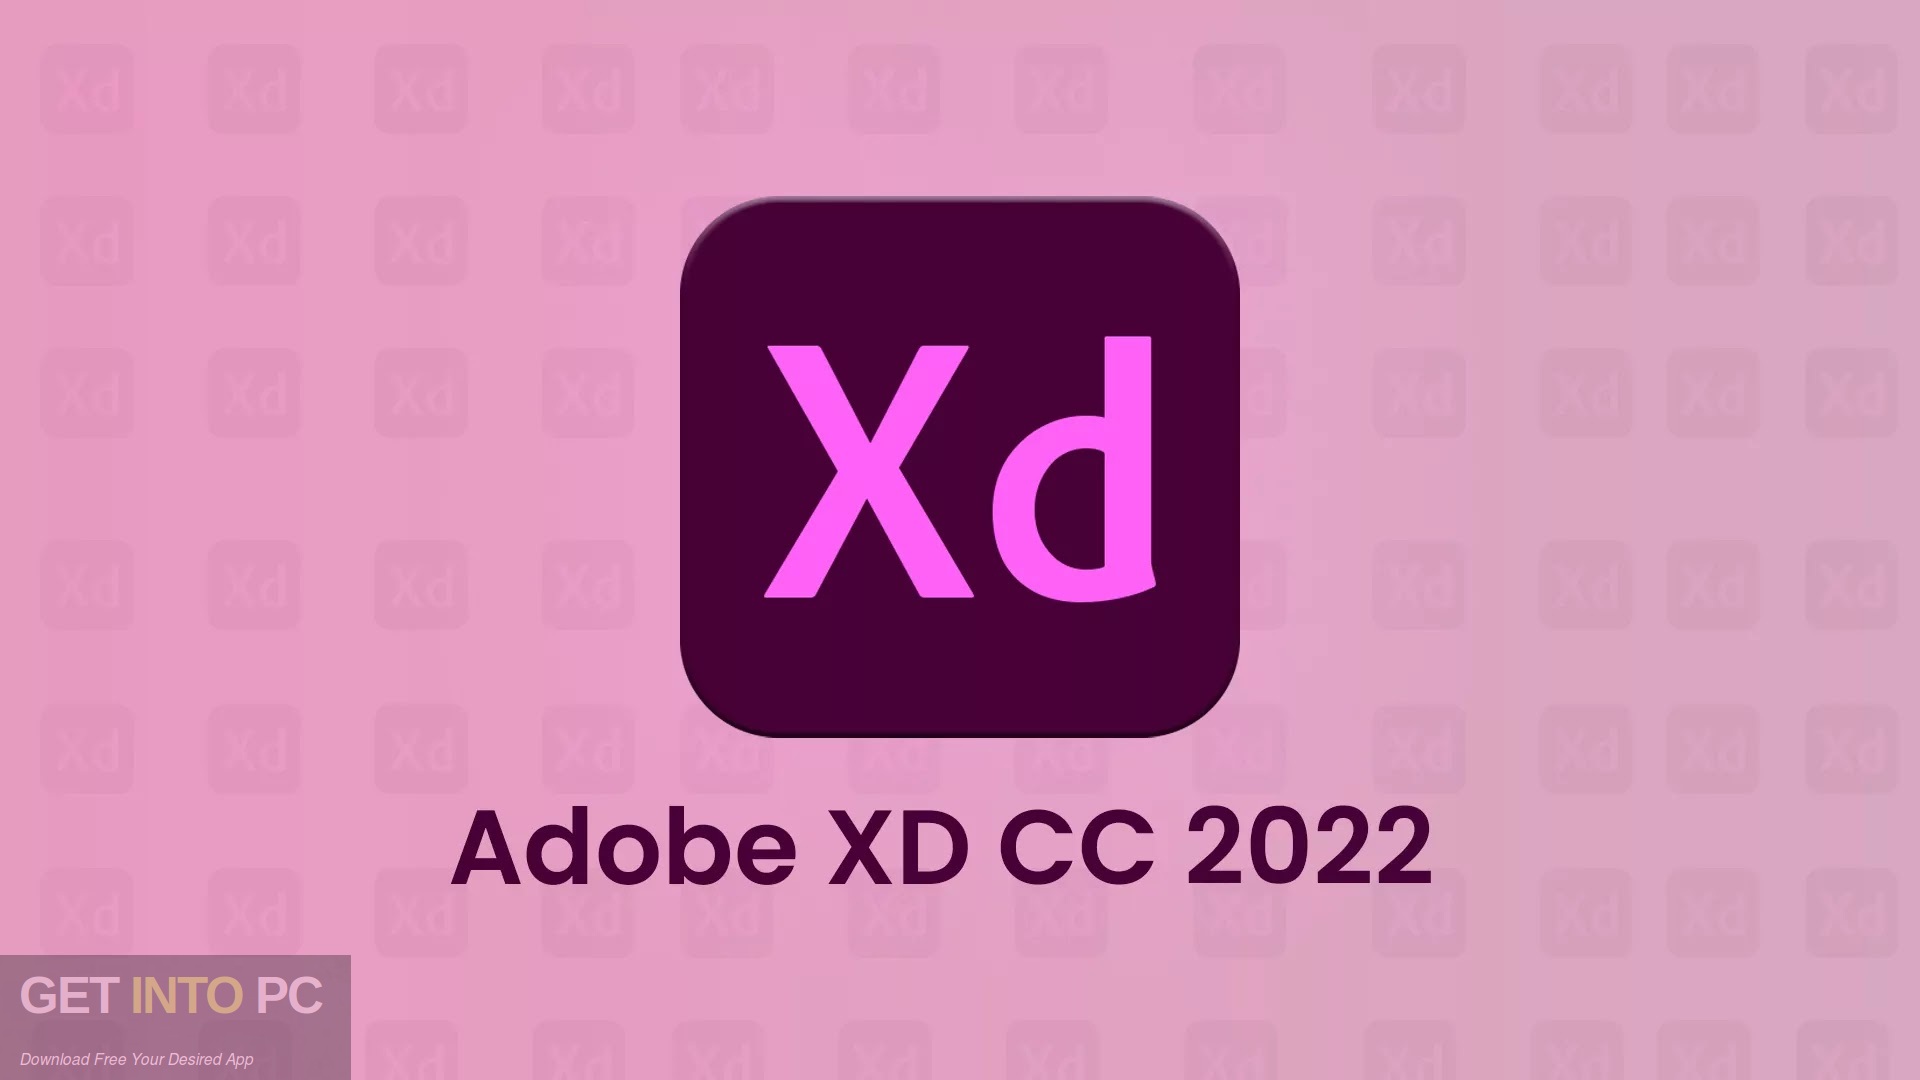 Adobe xd crack windows free download how to download youtube files to pc